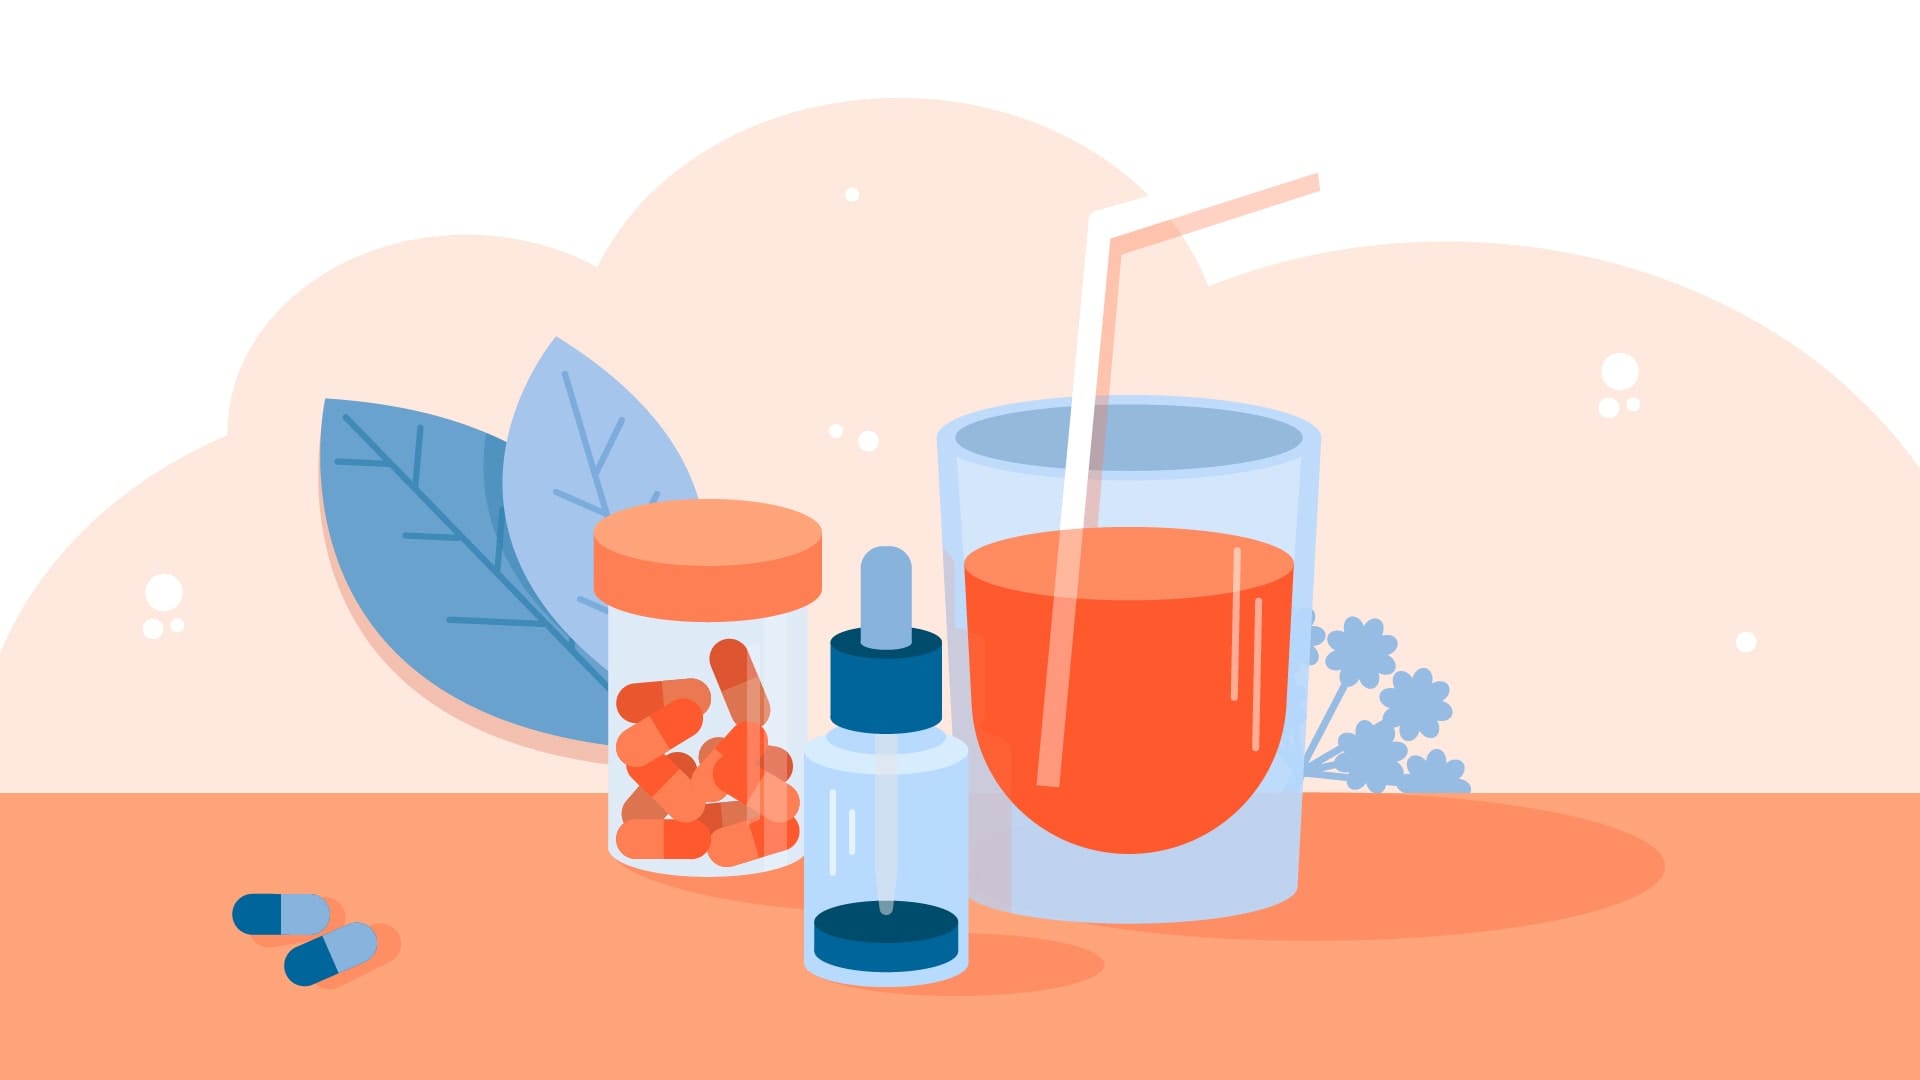 Illustration of probiotics, tea tree oil tinctures, and a glass of cranberry juice.